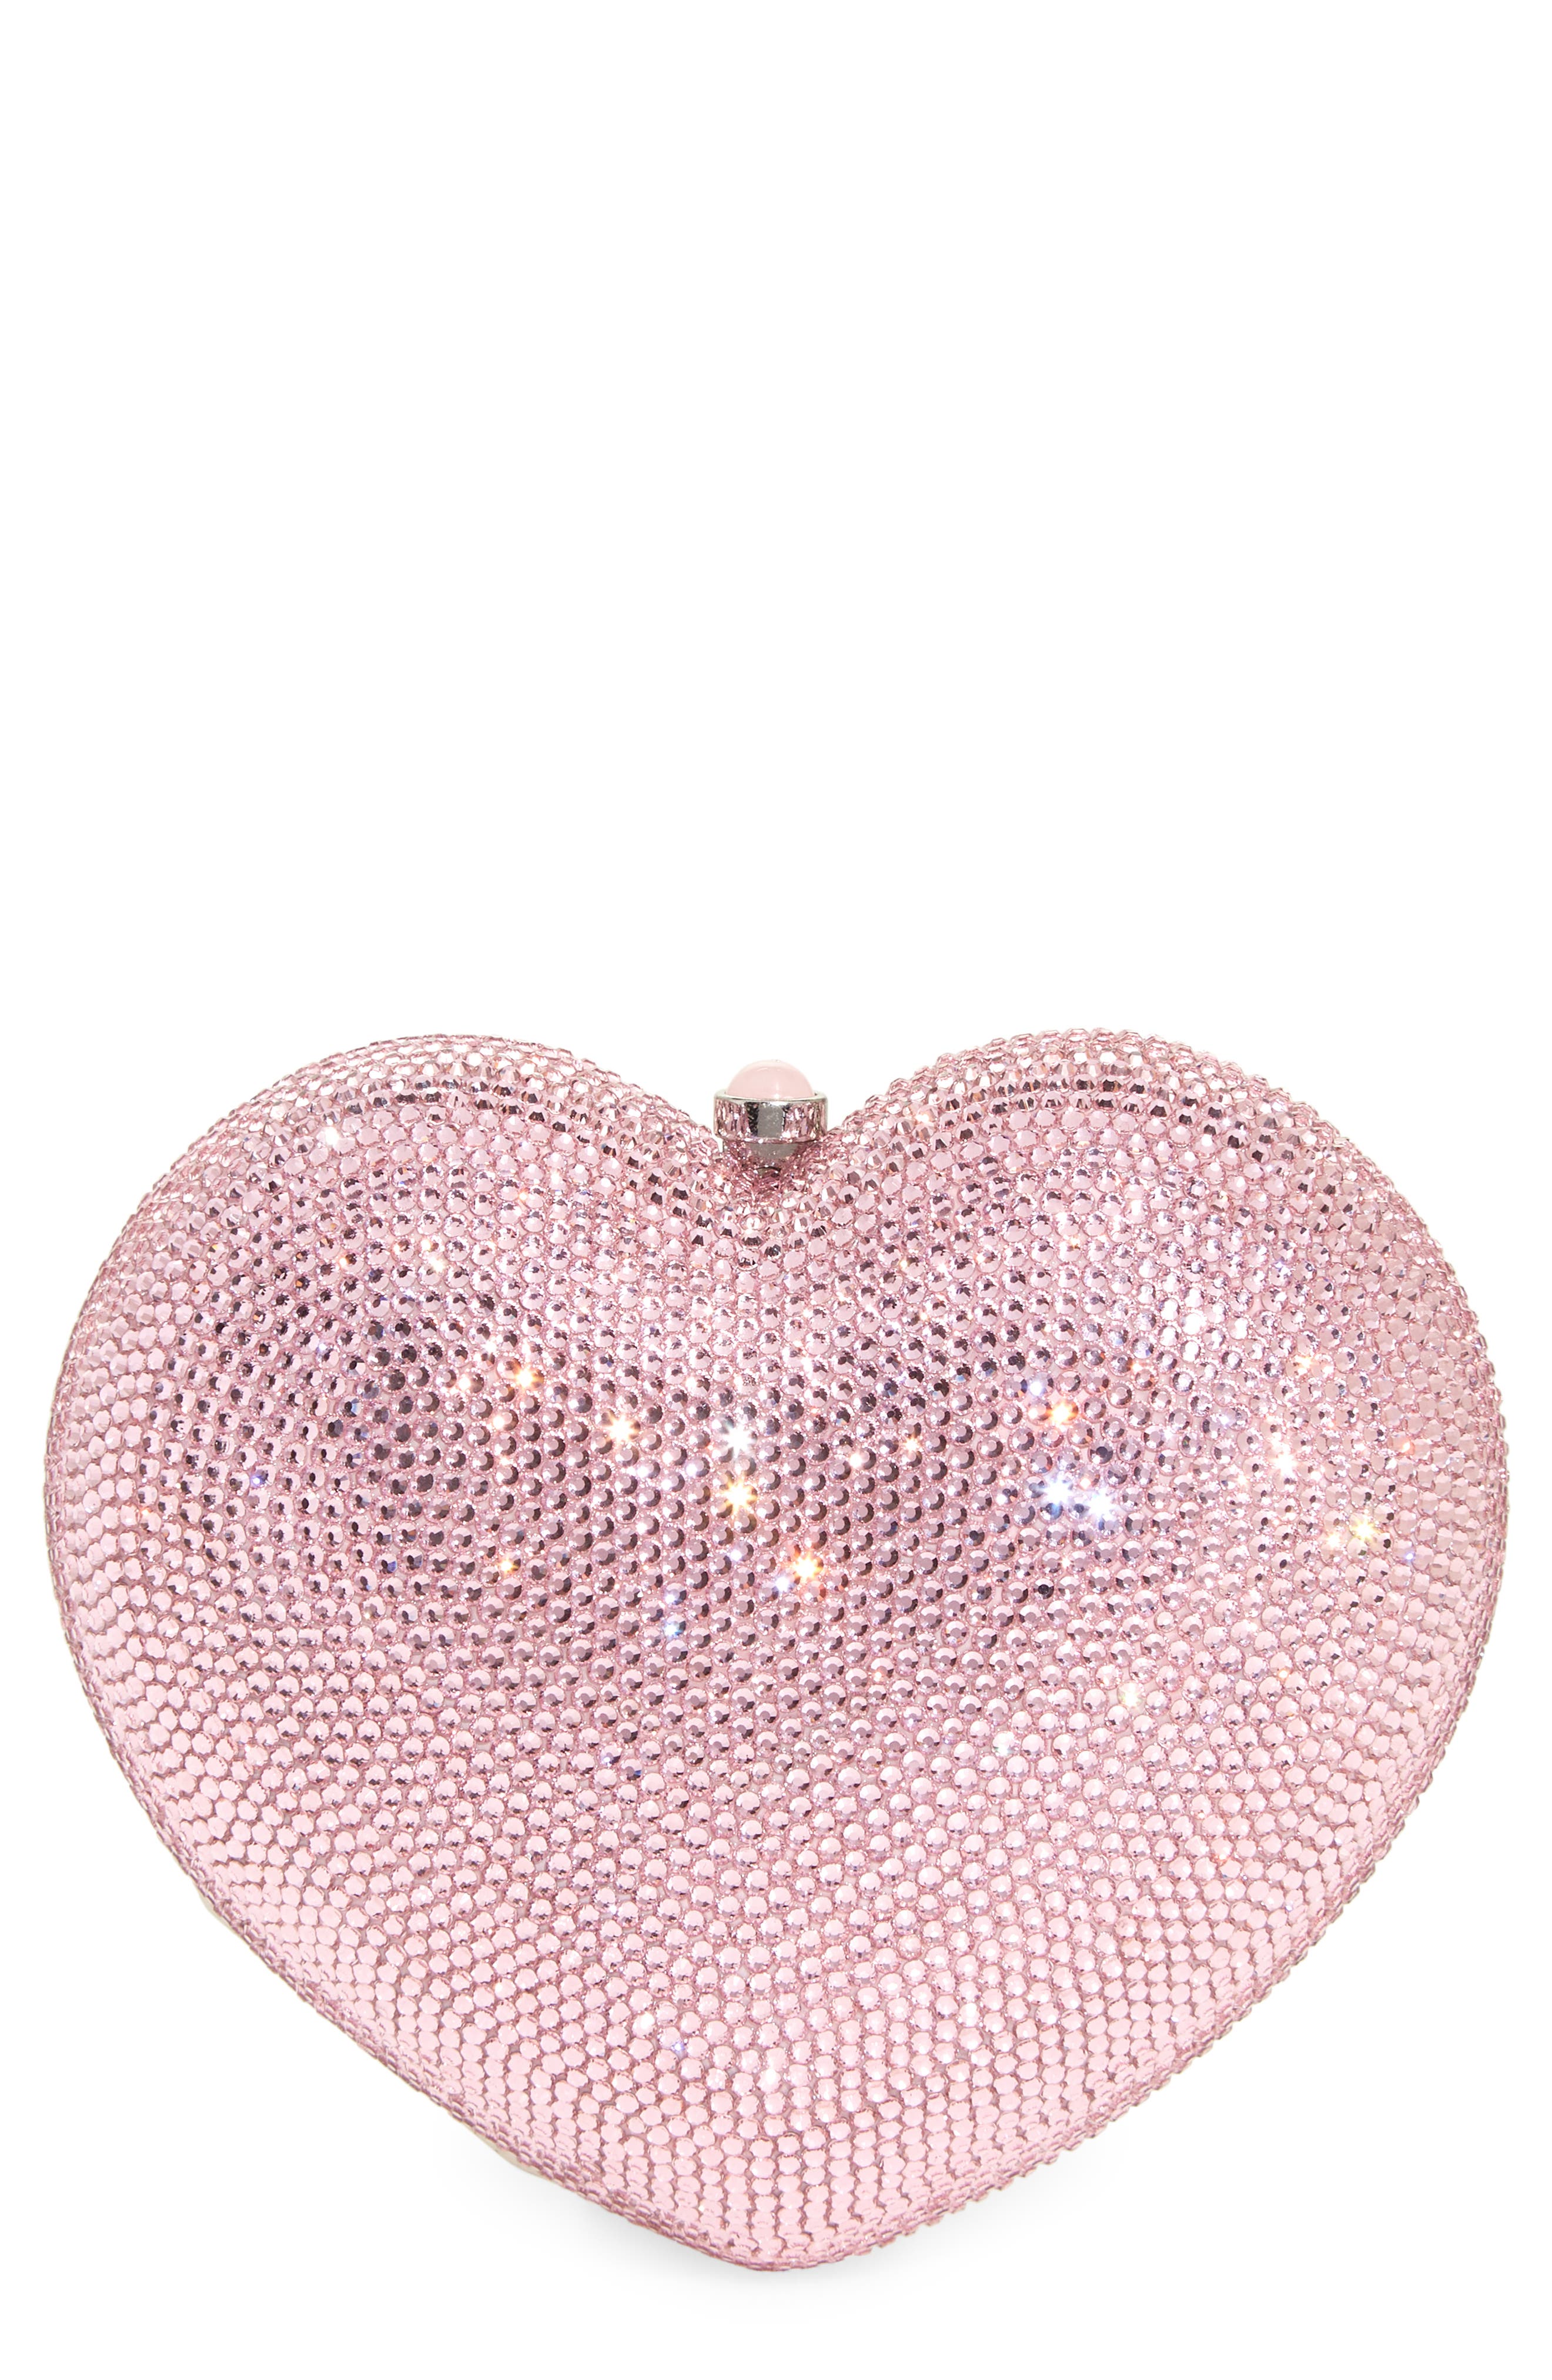 Judith Leiber Couture Lamour Petite Coeur Heart Clutch in Silver Rhine